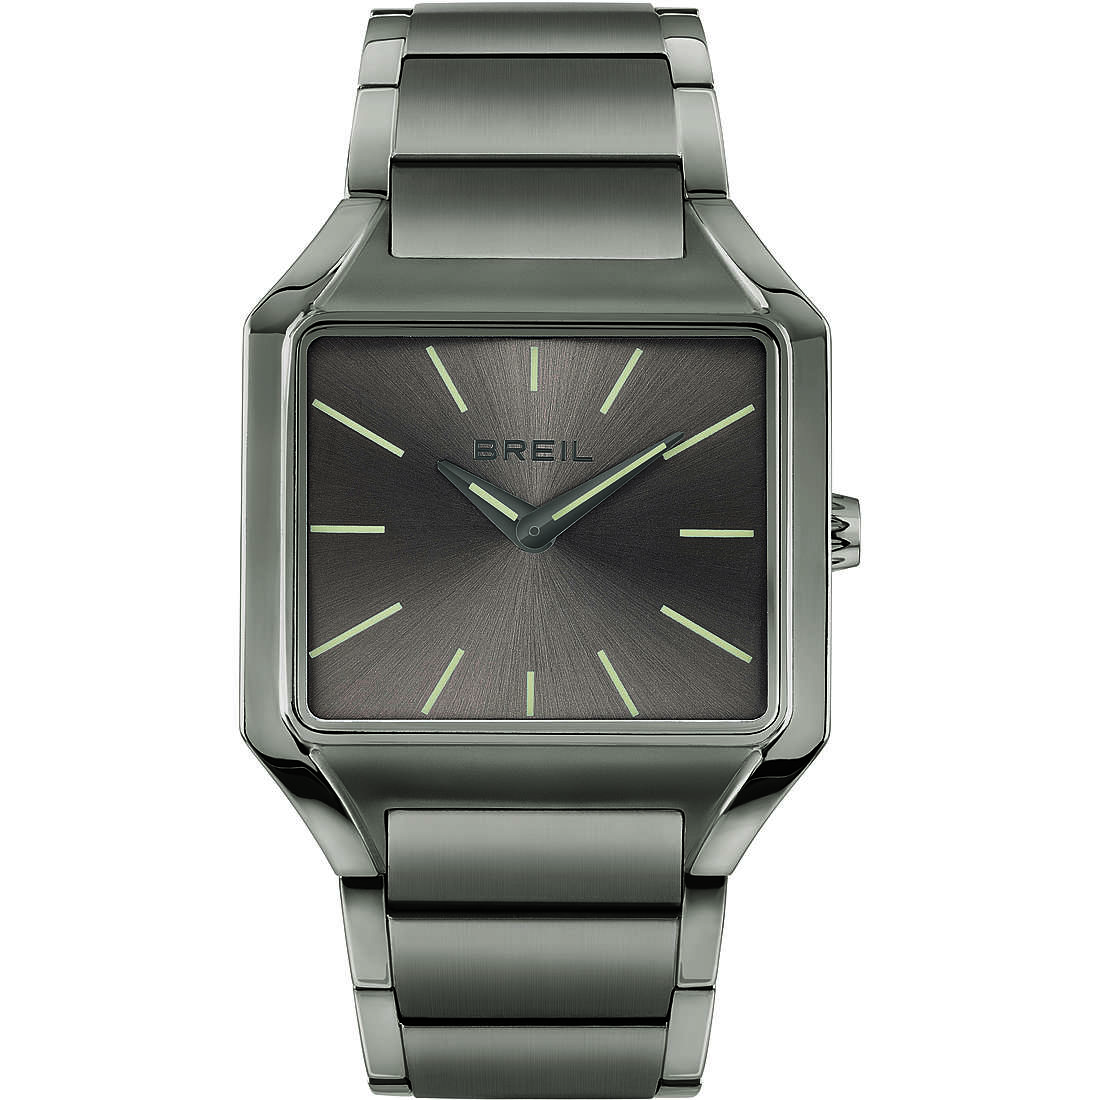 only time watch Steel Grey dial man The B TW1928